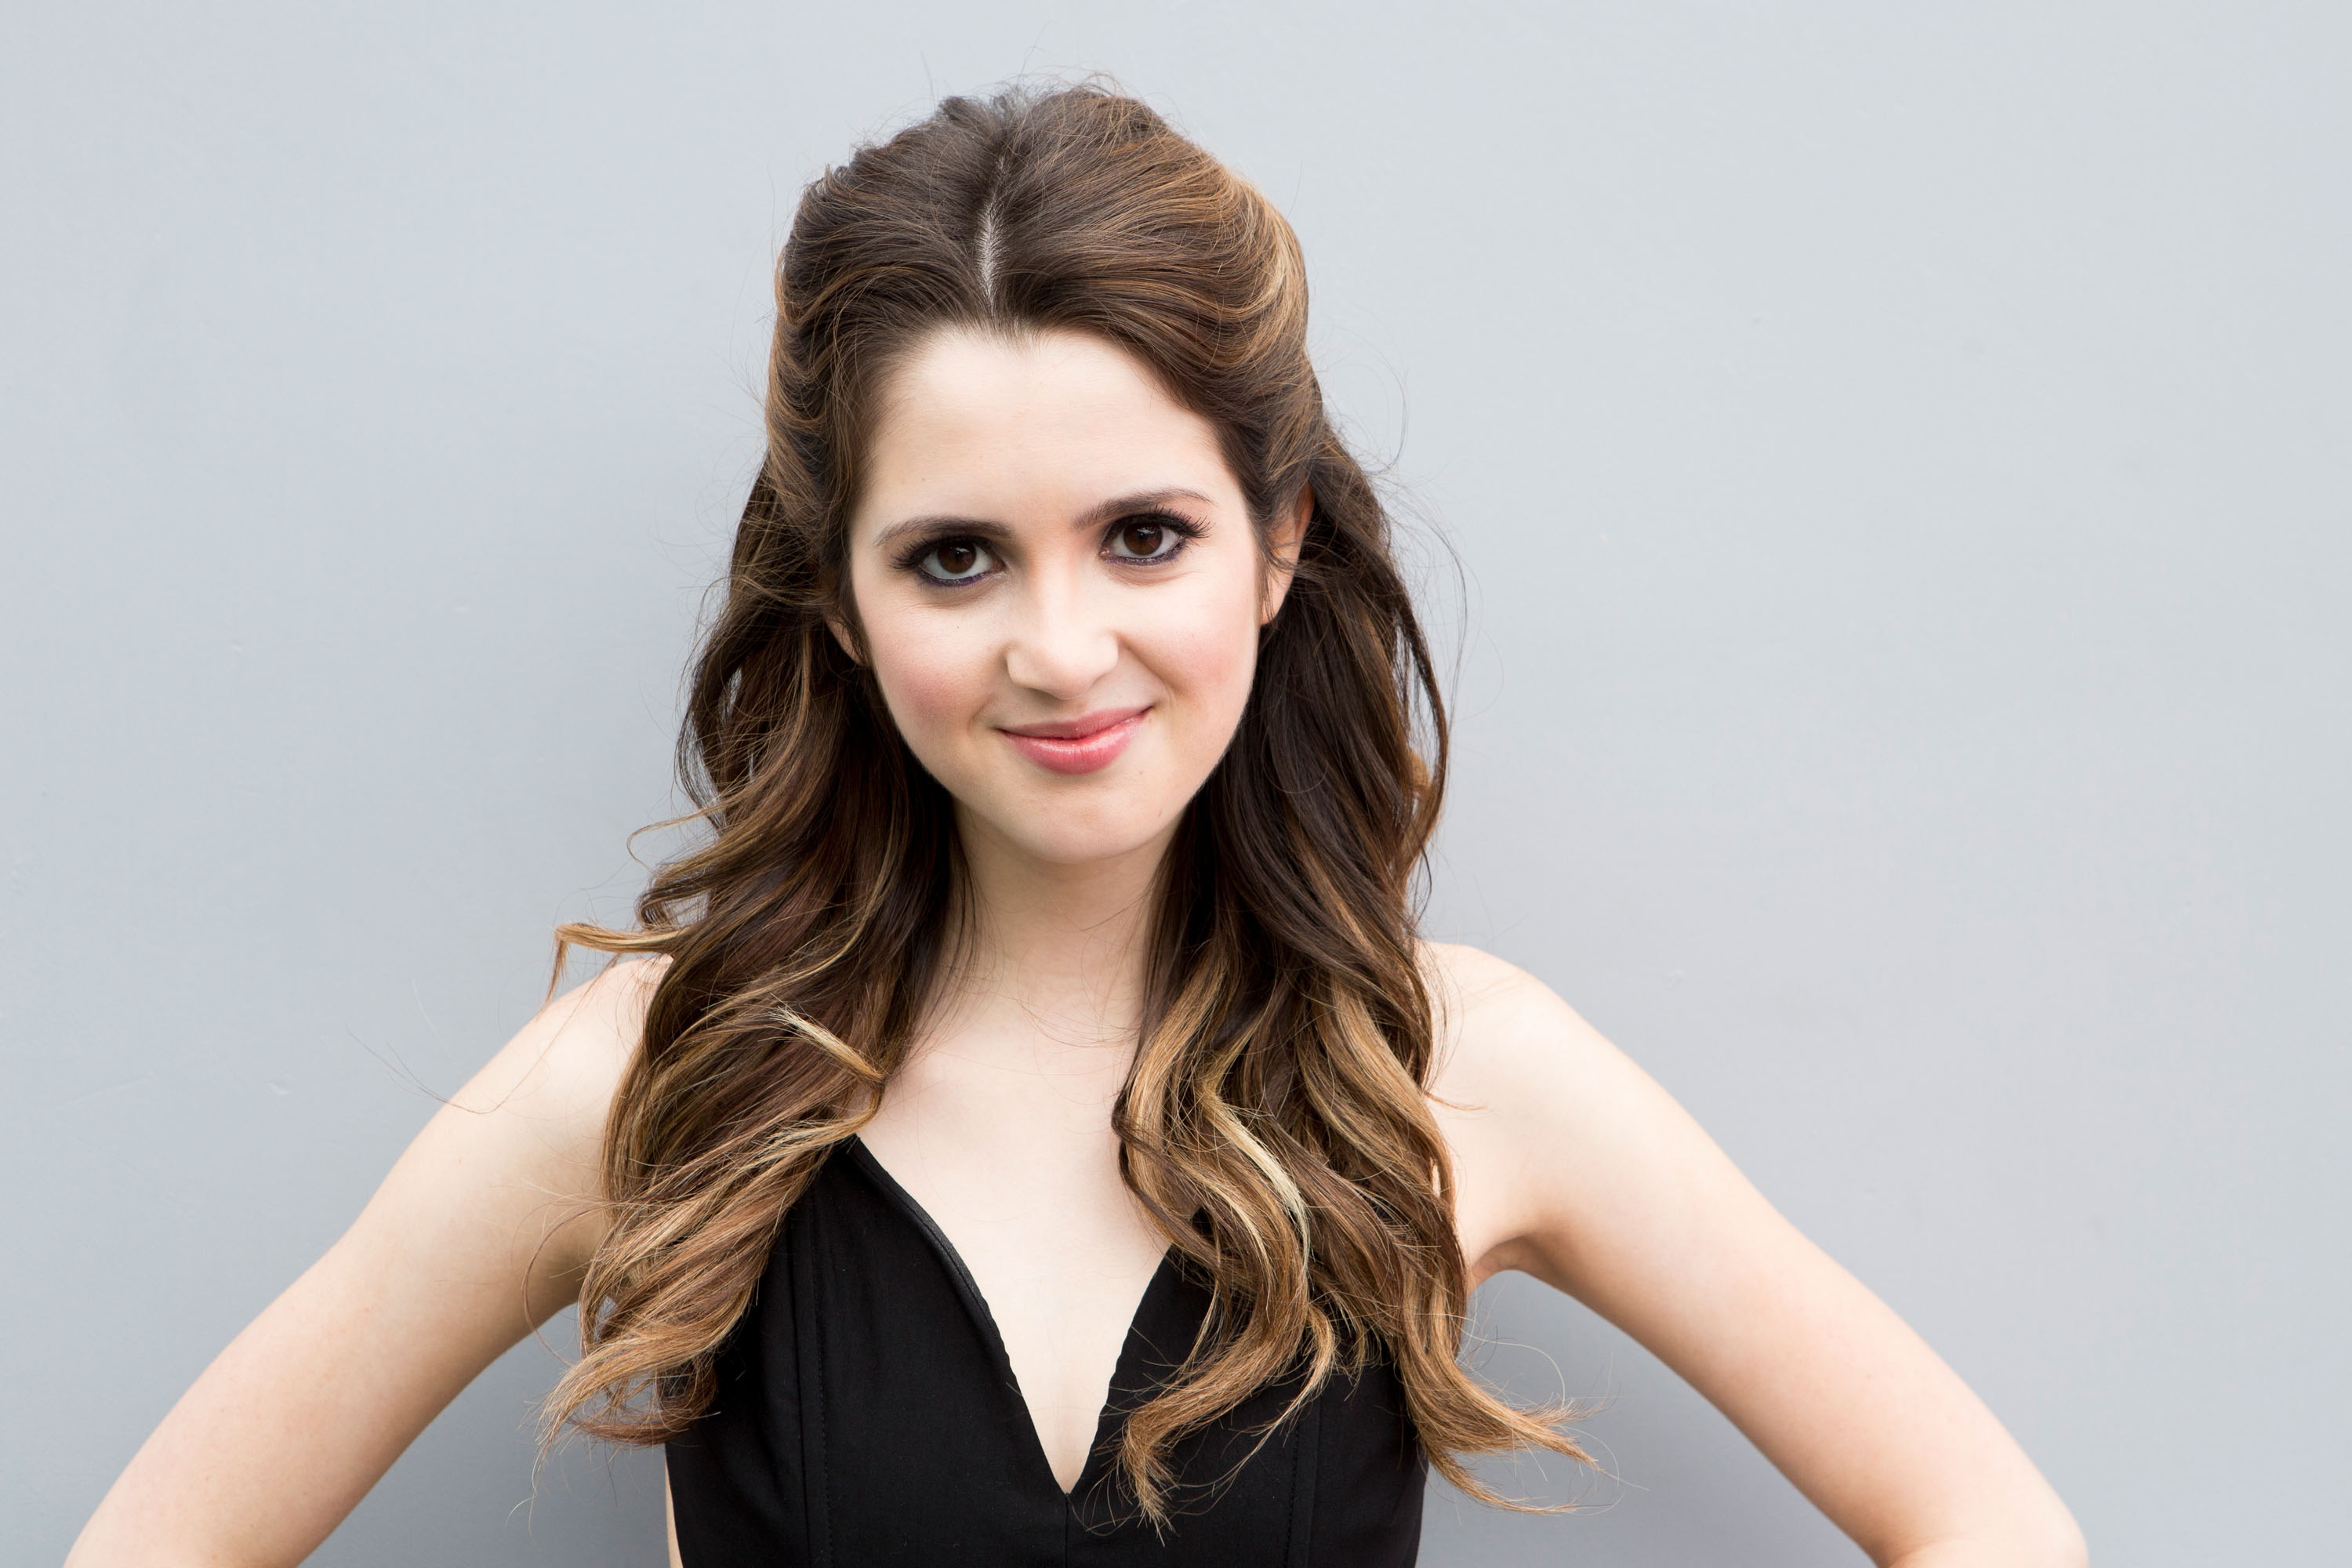 Laura Marano Wallpaper Image Photos Pictures Background